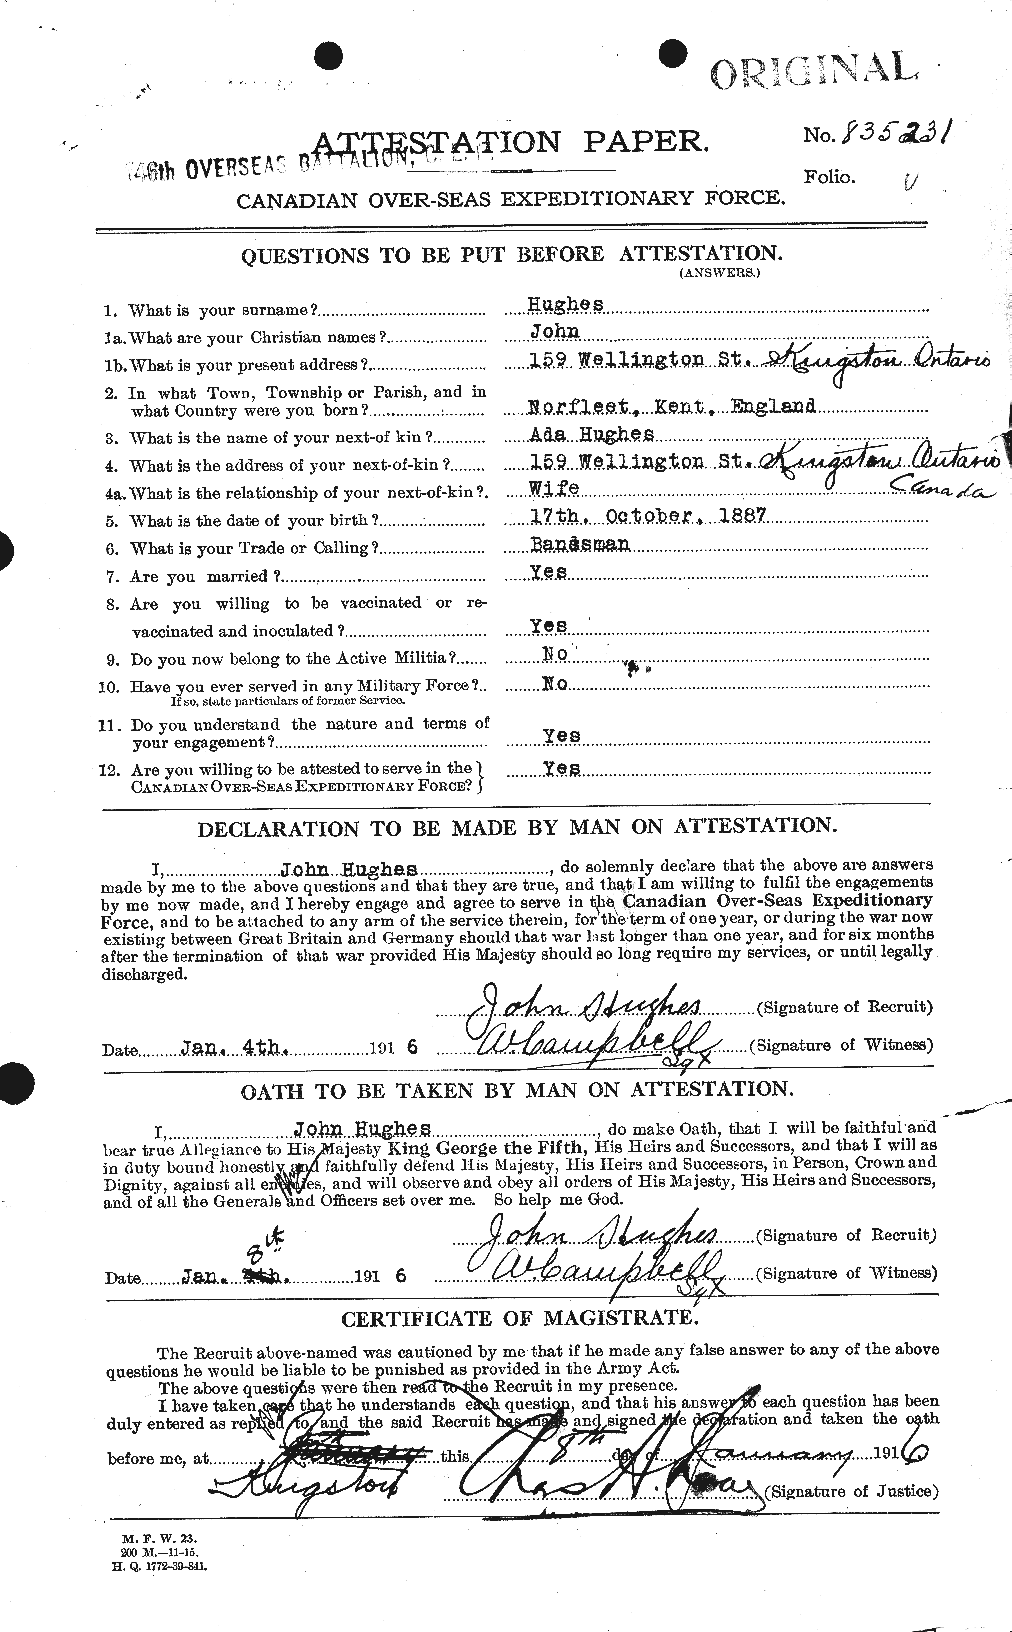 Personnel Records of the First World War - CEF 403976a